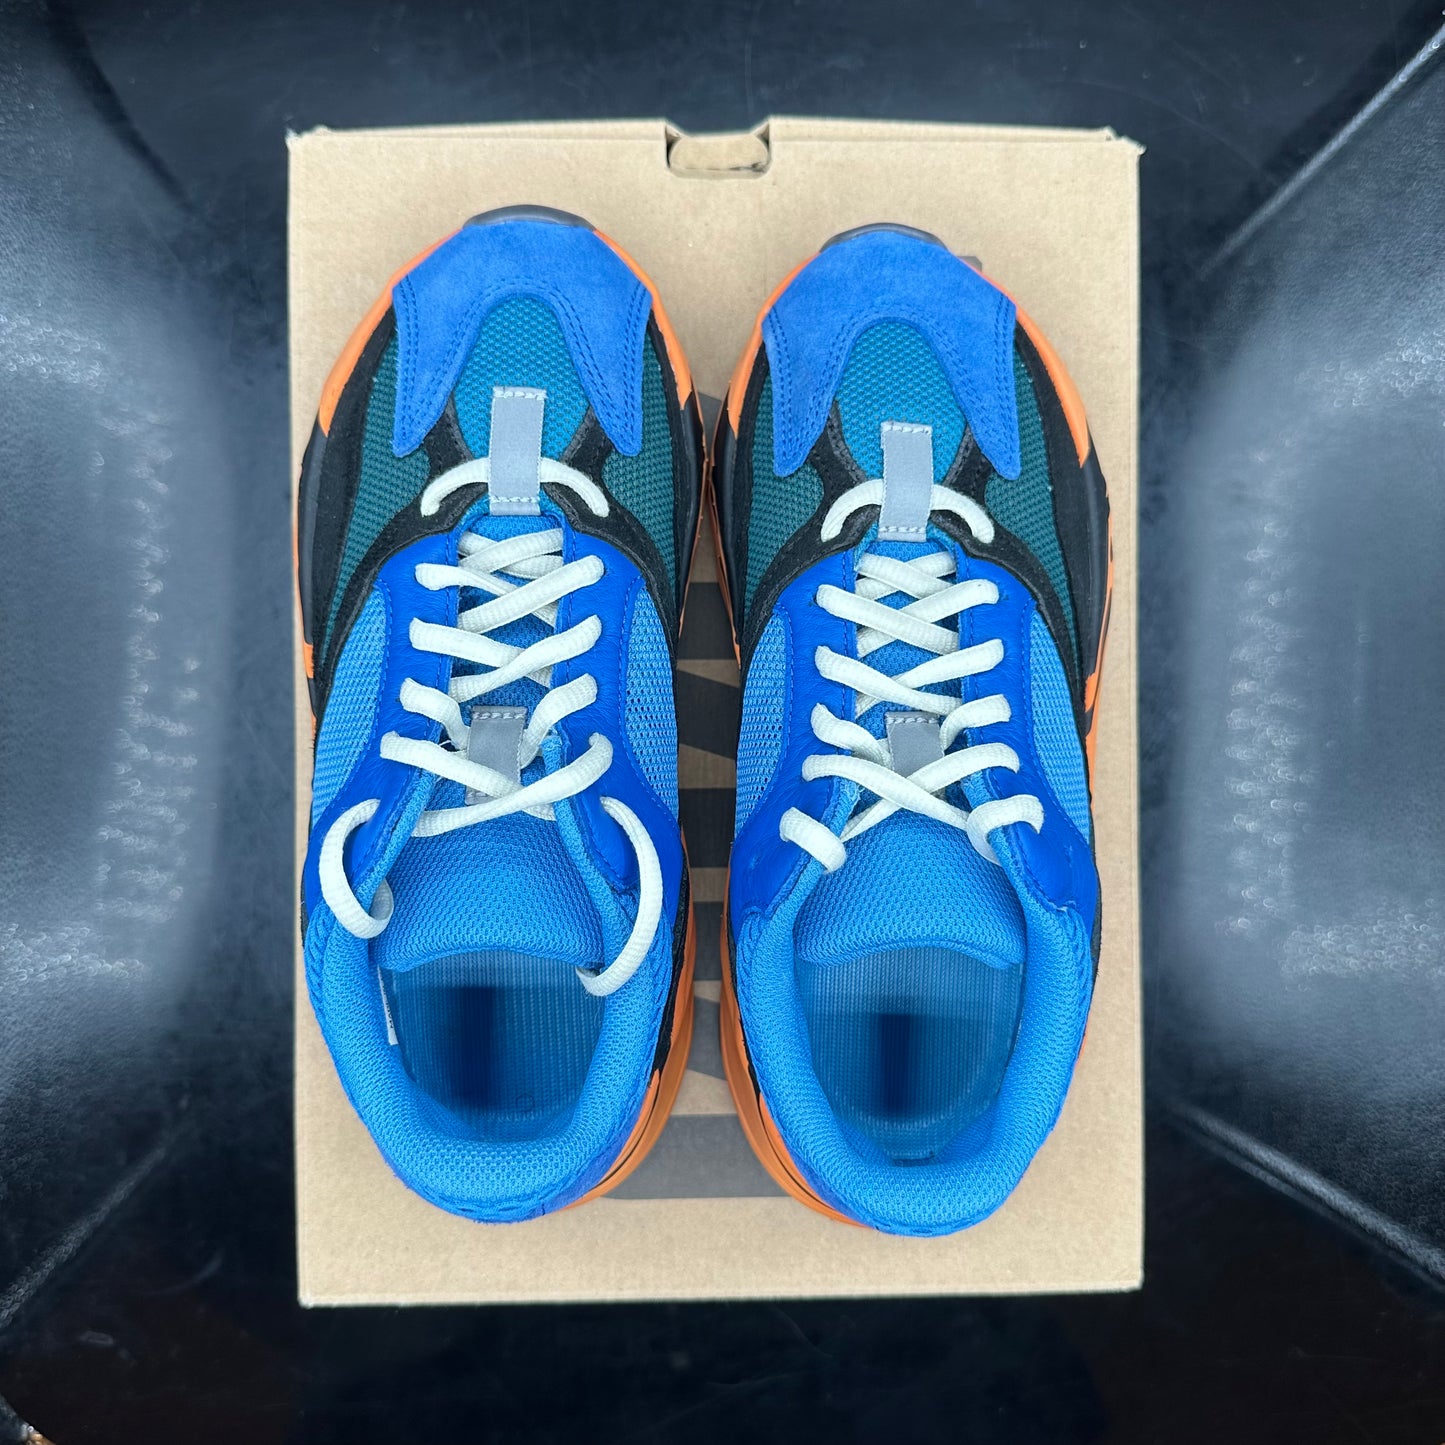 PRE-OWNED Yeezy 700 Bright Blue SZ 5